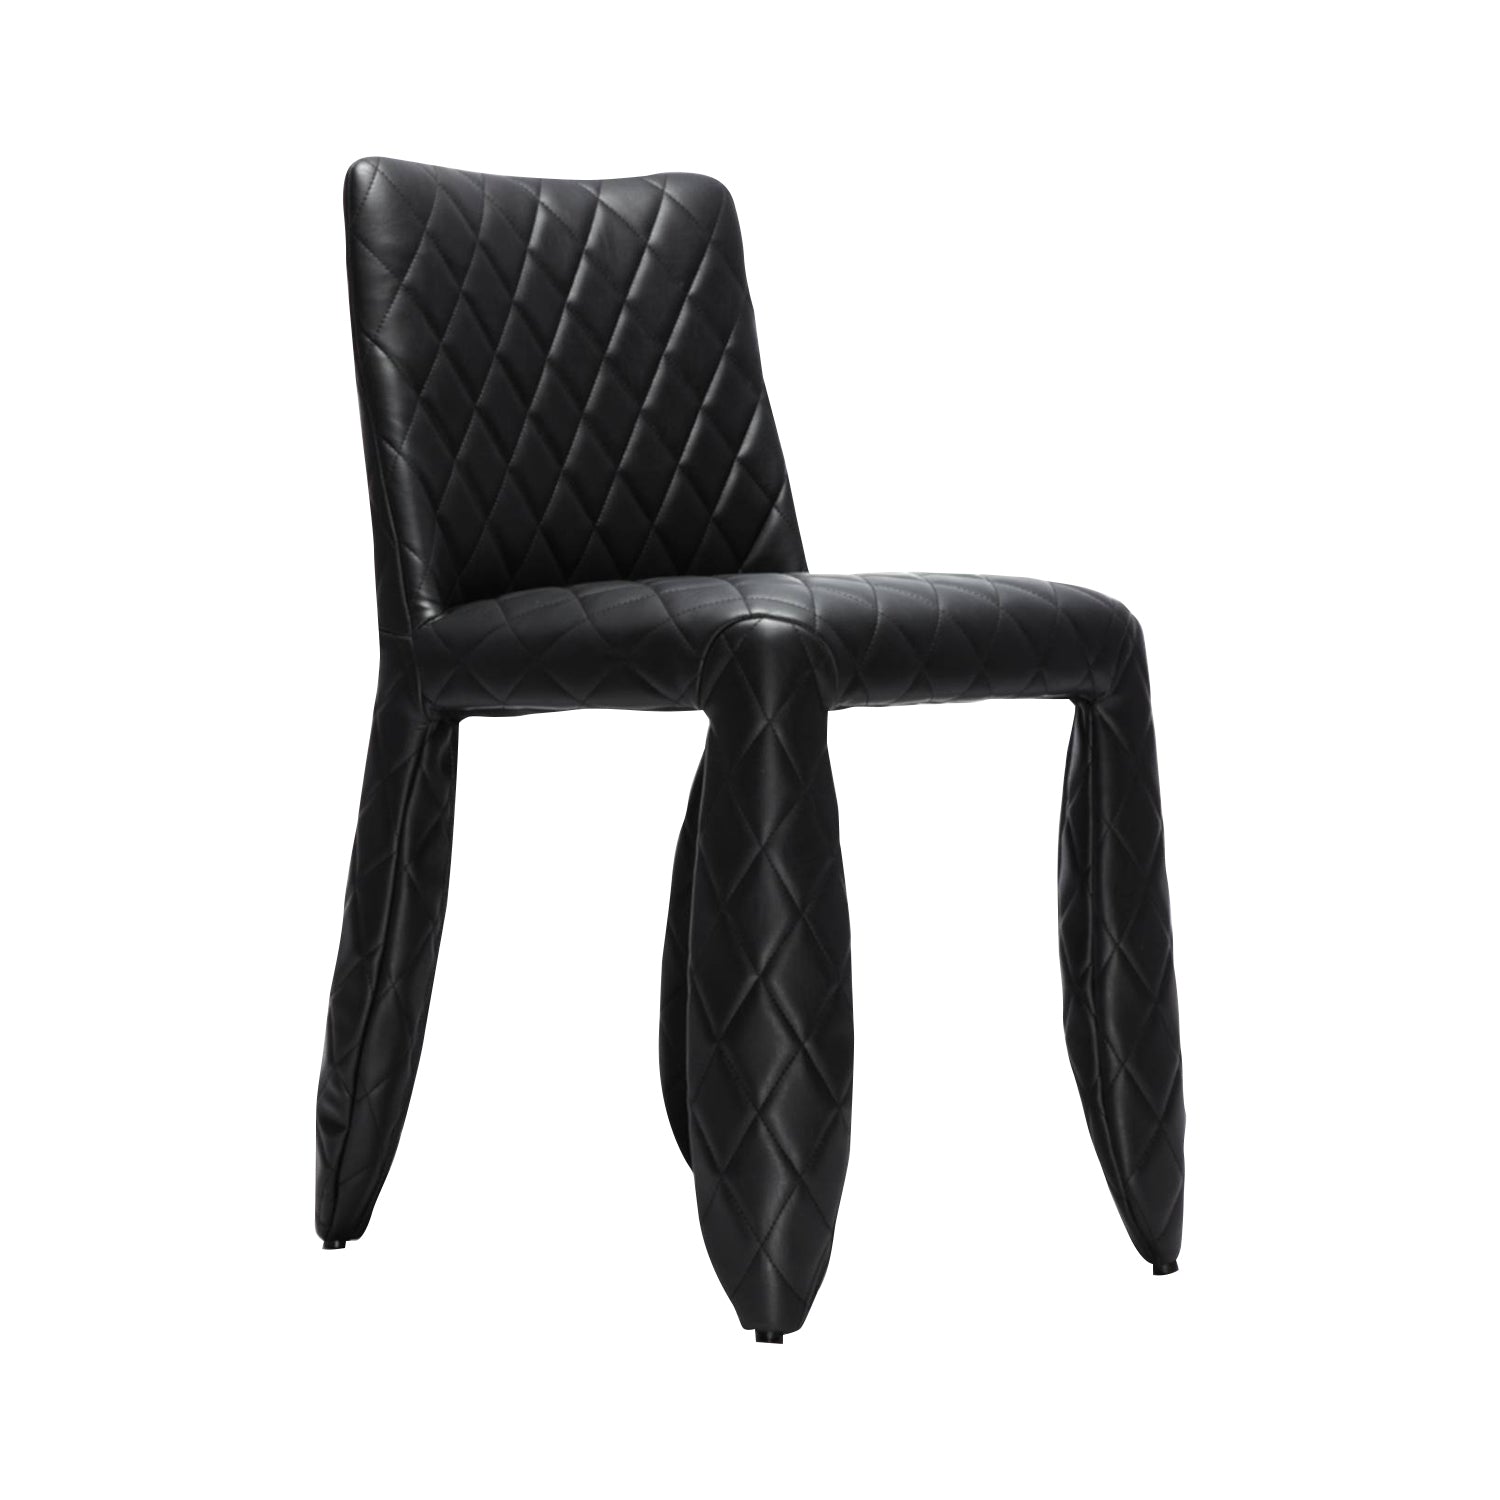 Monster Chair: Black + Without Arms + Without Embroidery